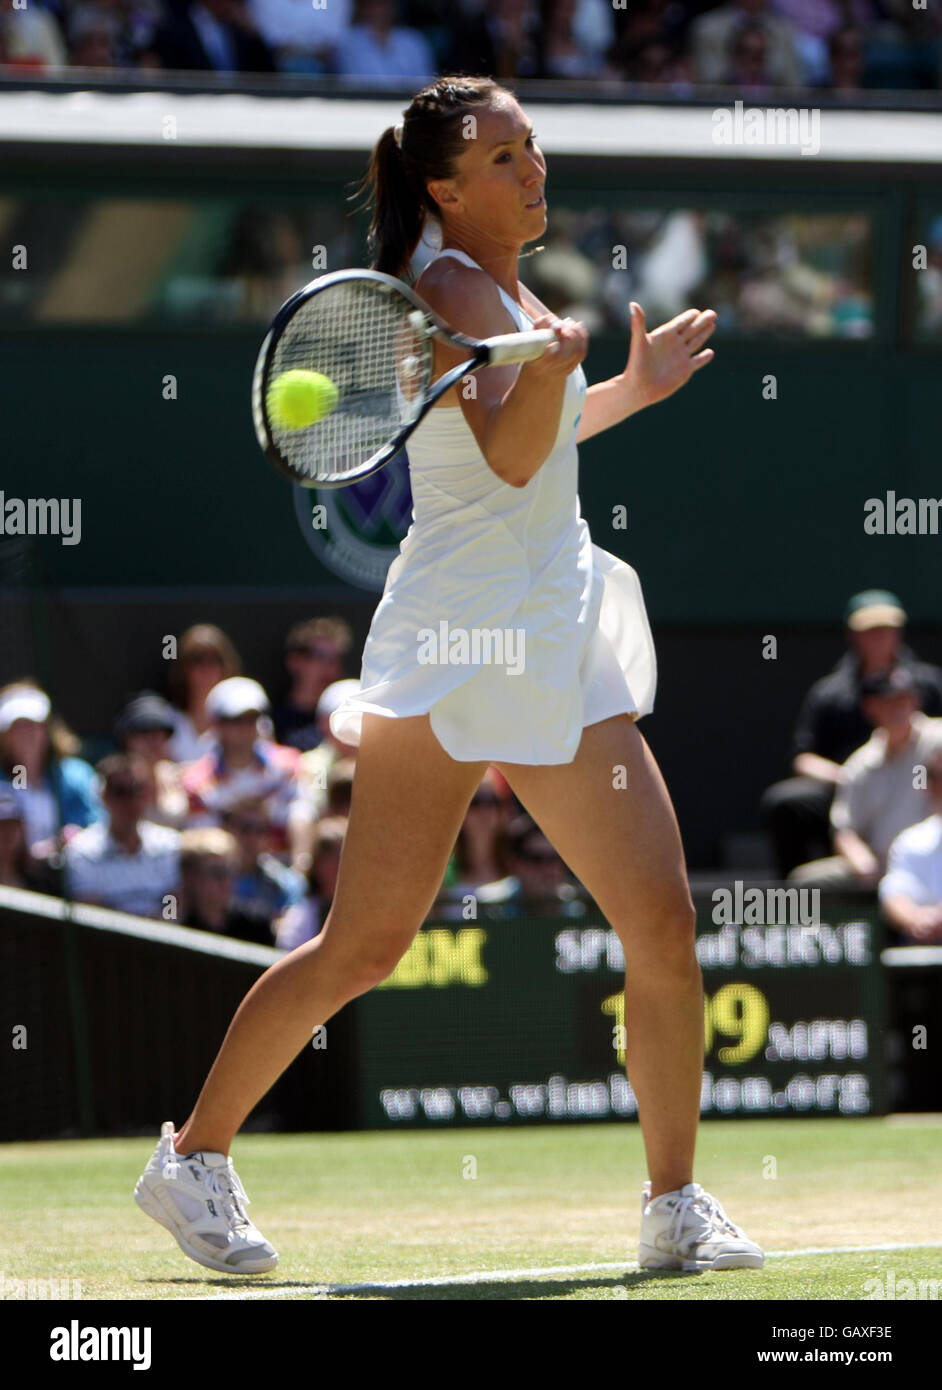 Serbia's Jelena Jankovic in action against Denmark's Caroline Wozniacki during the Wimbledon Championships 2008 at the All England Tennis Club in Wimbledon. Stock Photo